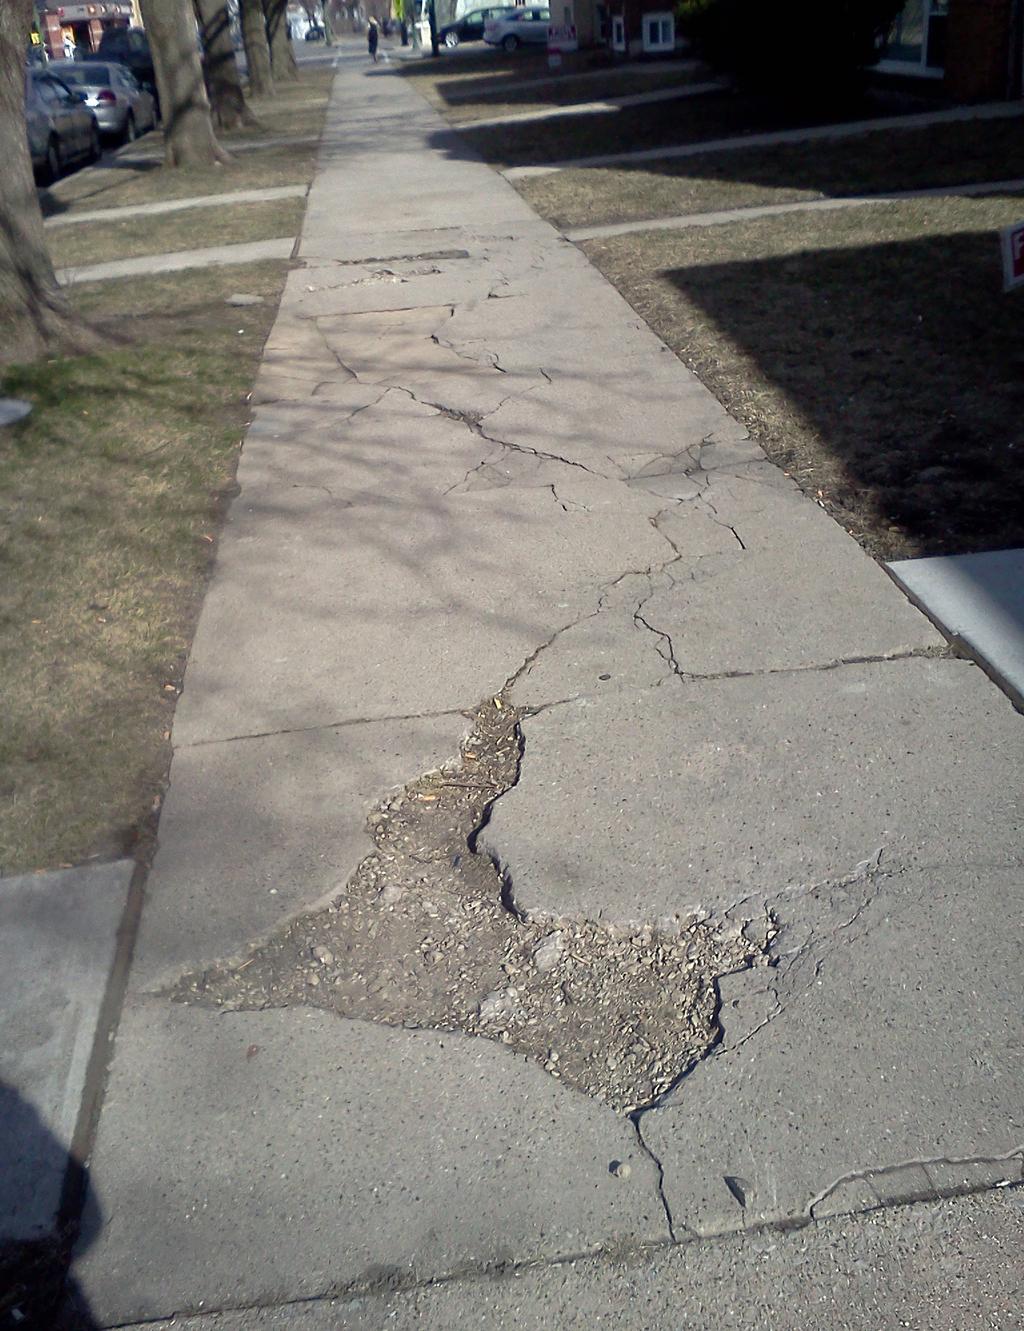 However, due to the expense of curb replacement, very few have been replaced in recent years.